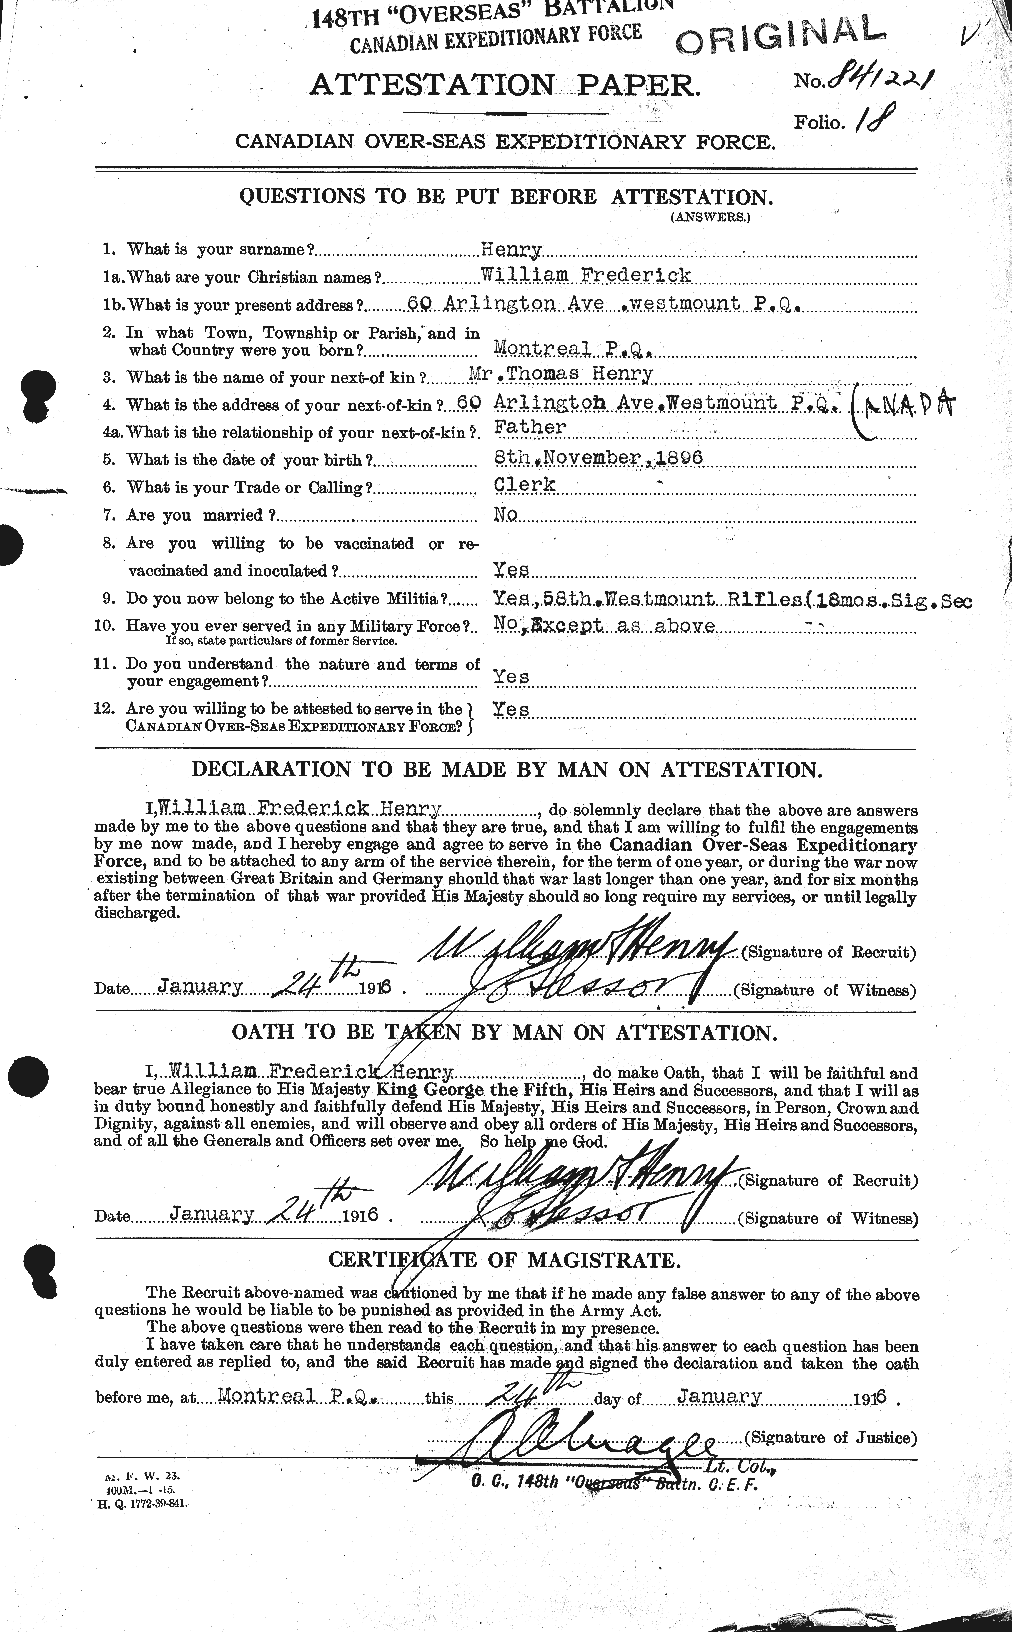 Personnel Records of the First World War - CEF 387776a